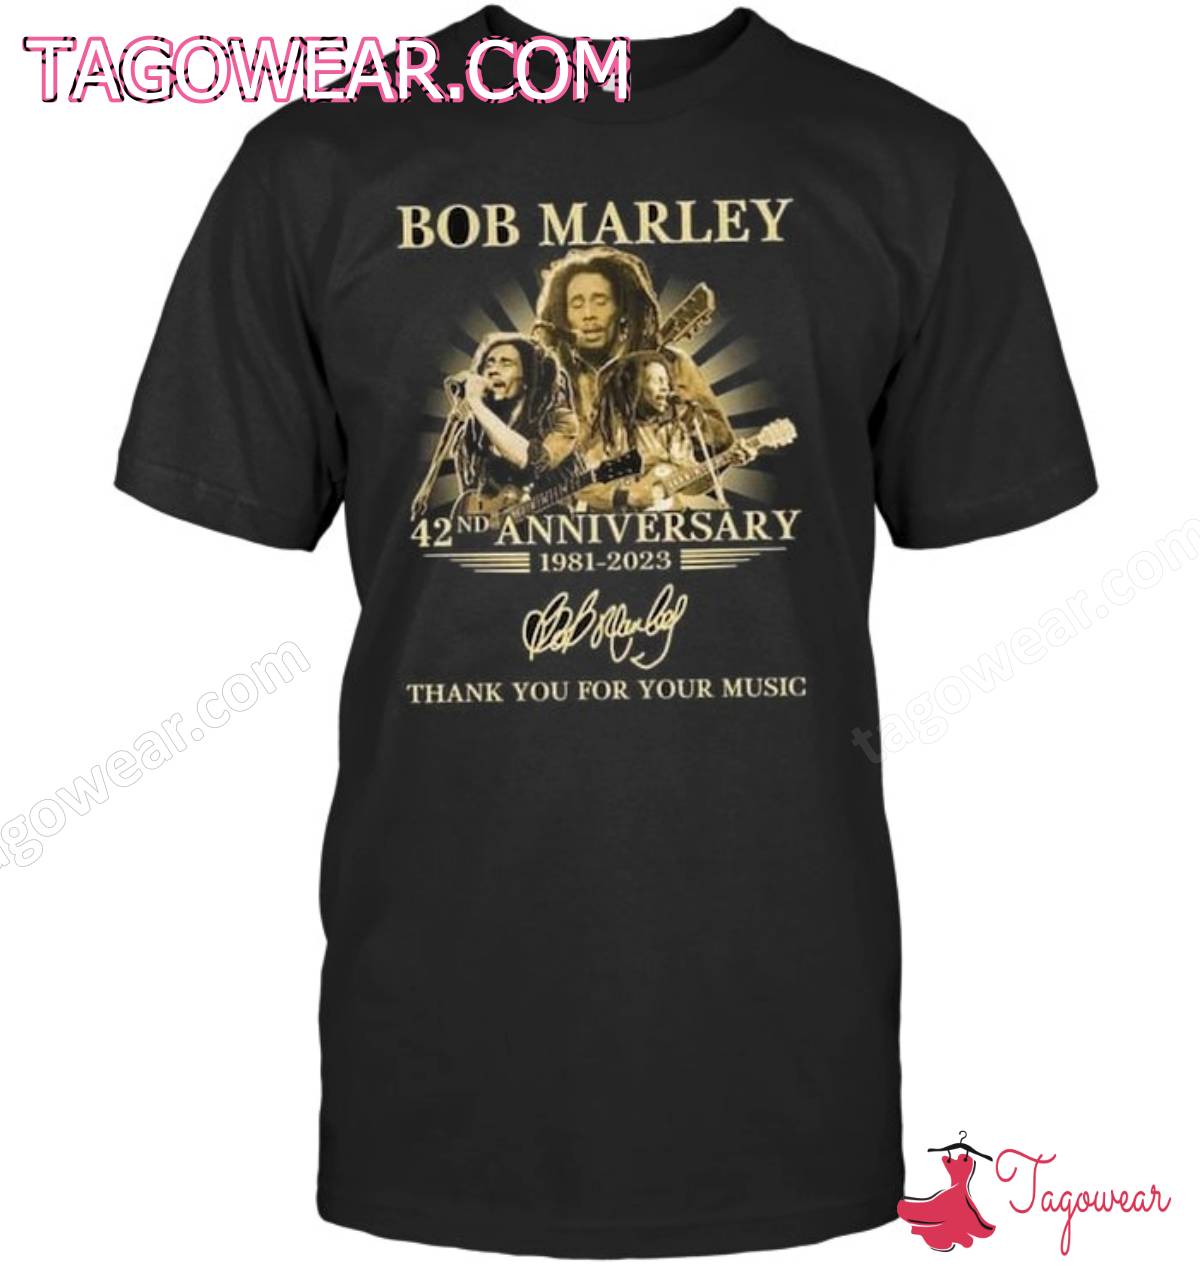 Bob Marley 42nd Anniversary 1981-2023 Signature Thank You For Your Music Shirt